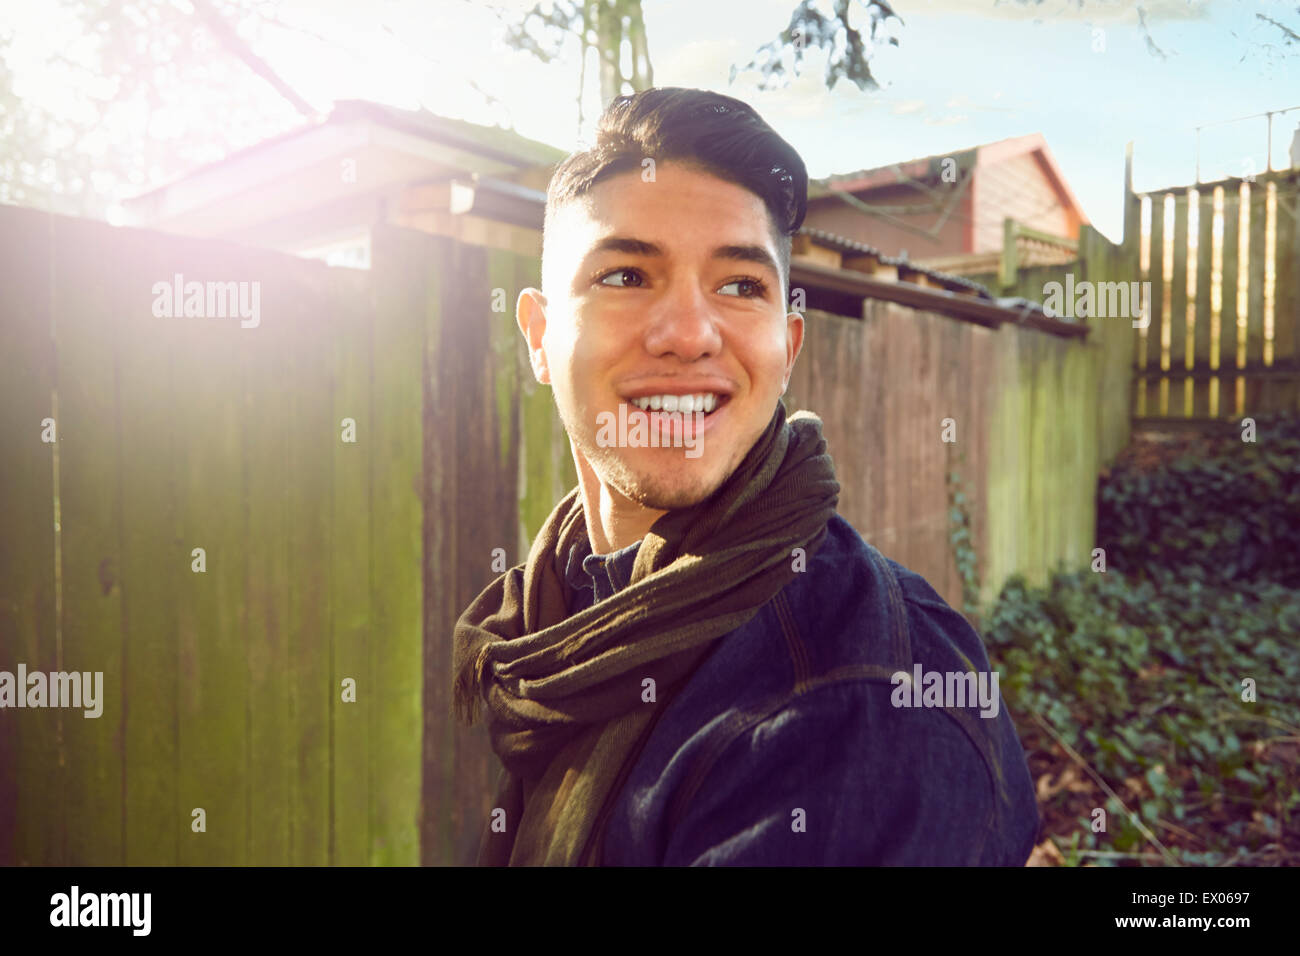 Young man with quiff looking away, smiling Stock Photo